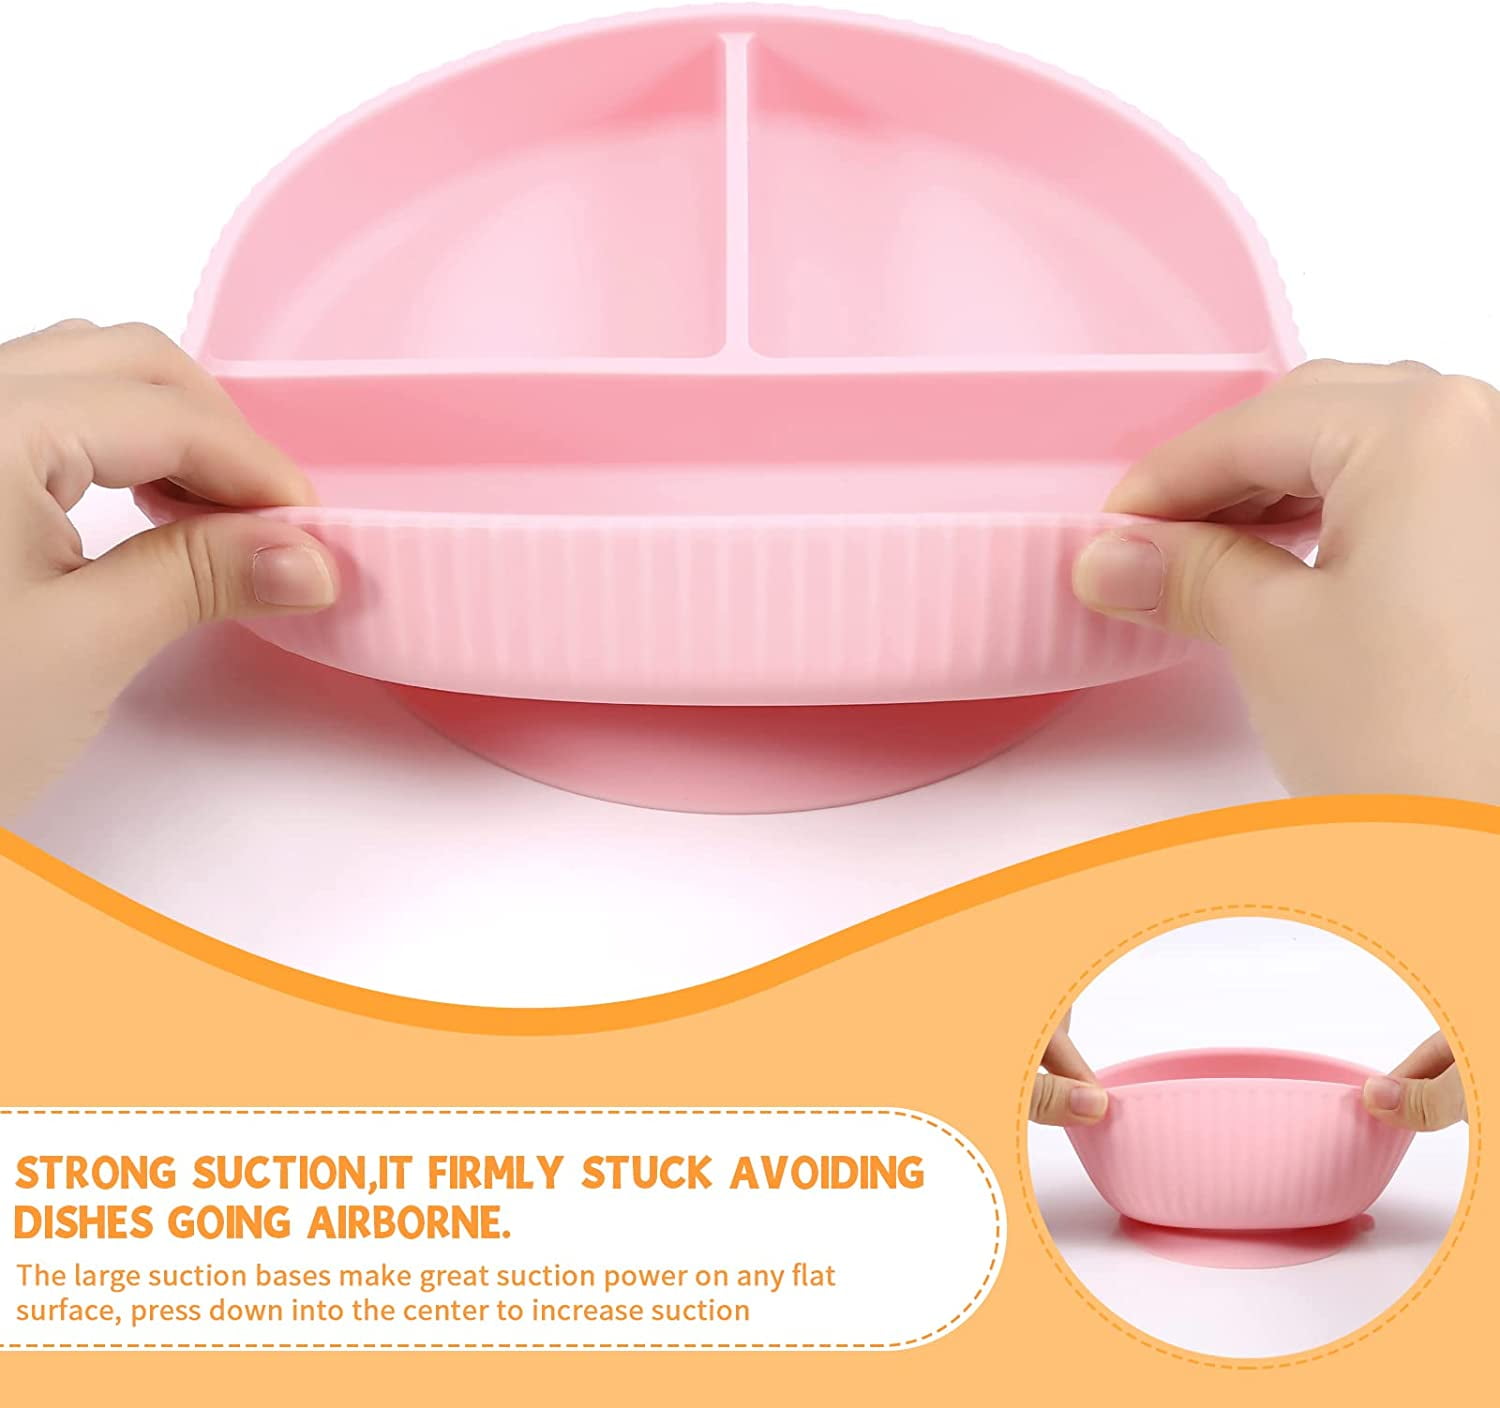 Lilow Baby Led Weaning Supplies - 6pcs - Silicone Feeding Set - Light Pink